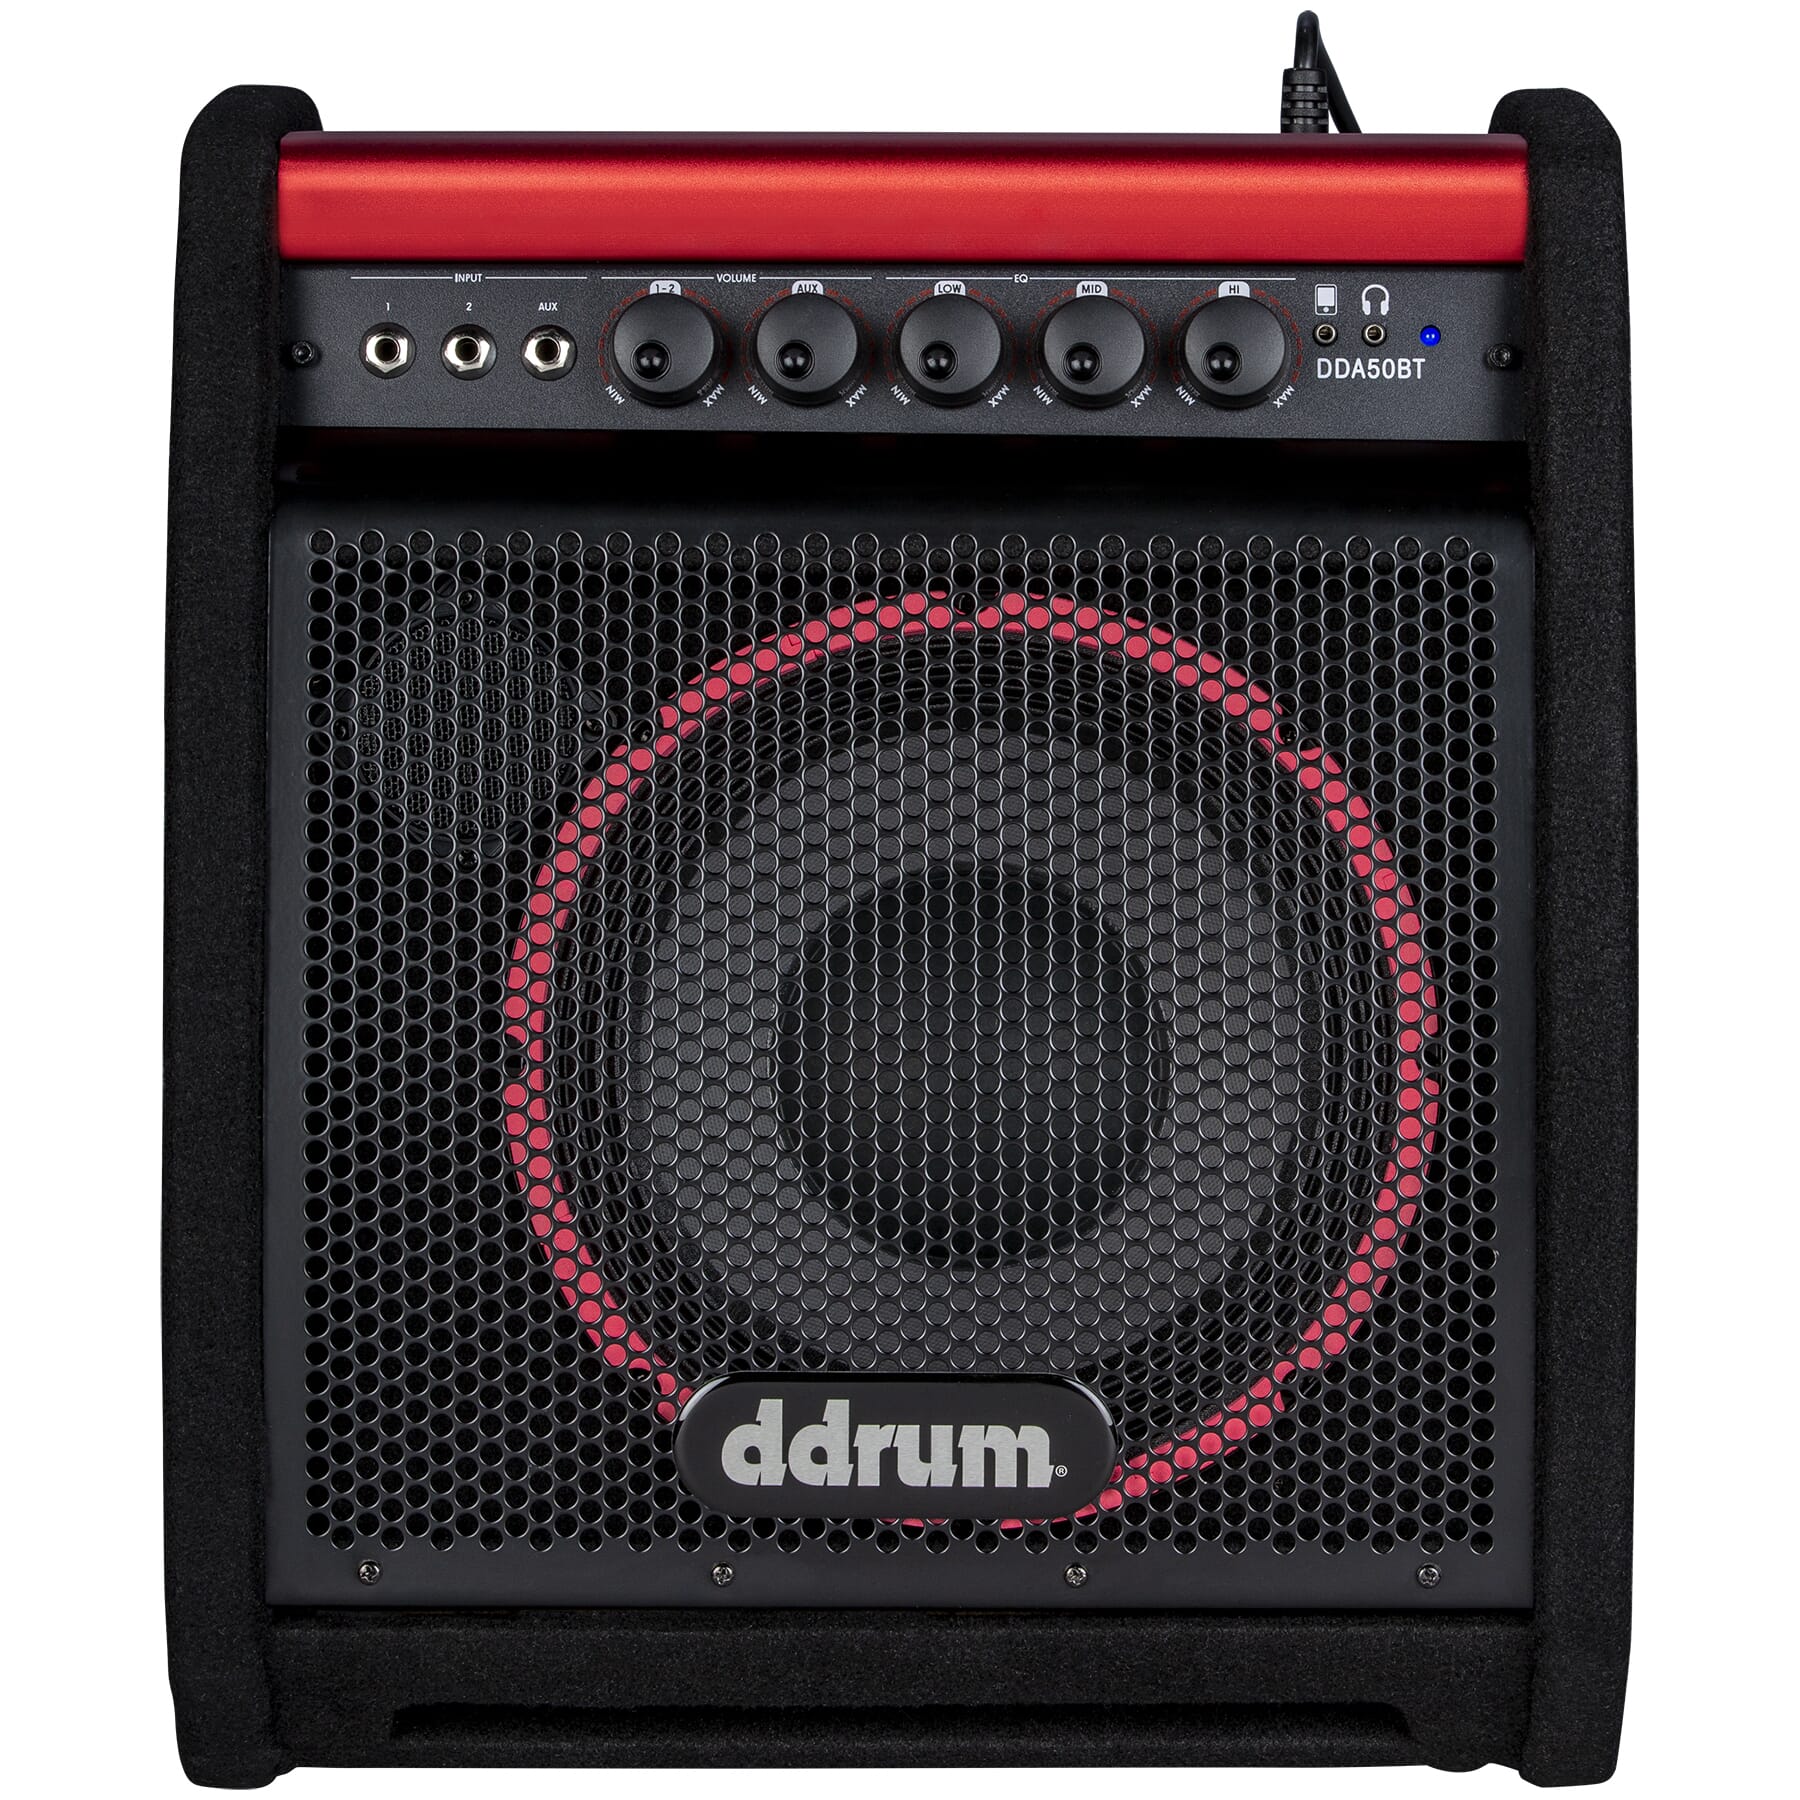 Ddrum 50 watt electronic percussion amp with Blue Tooth 